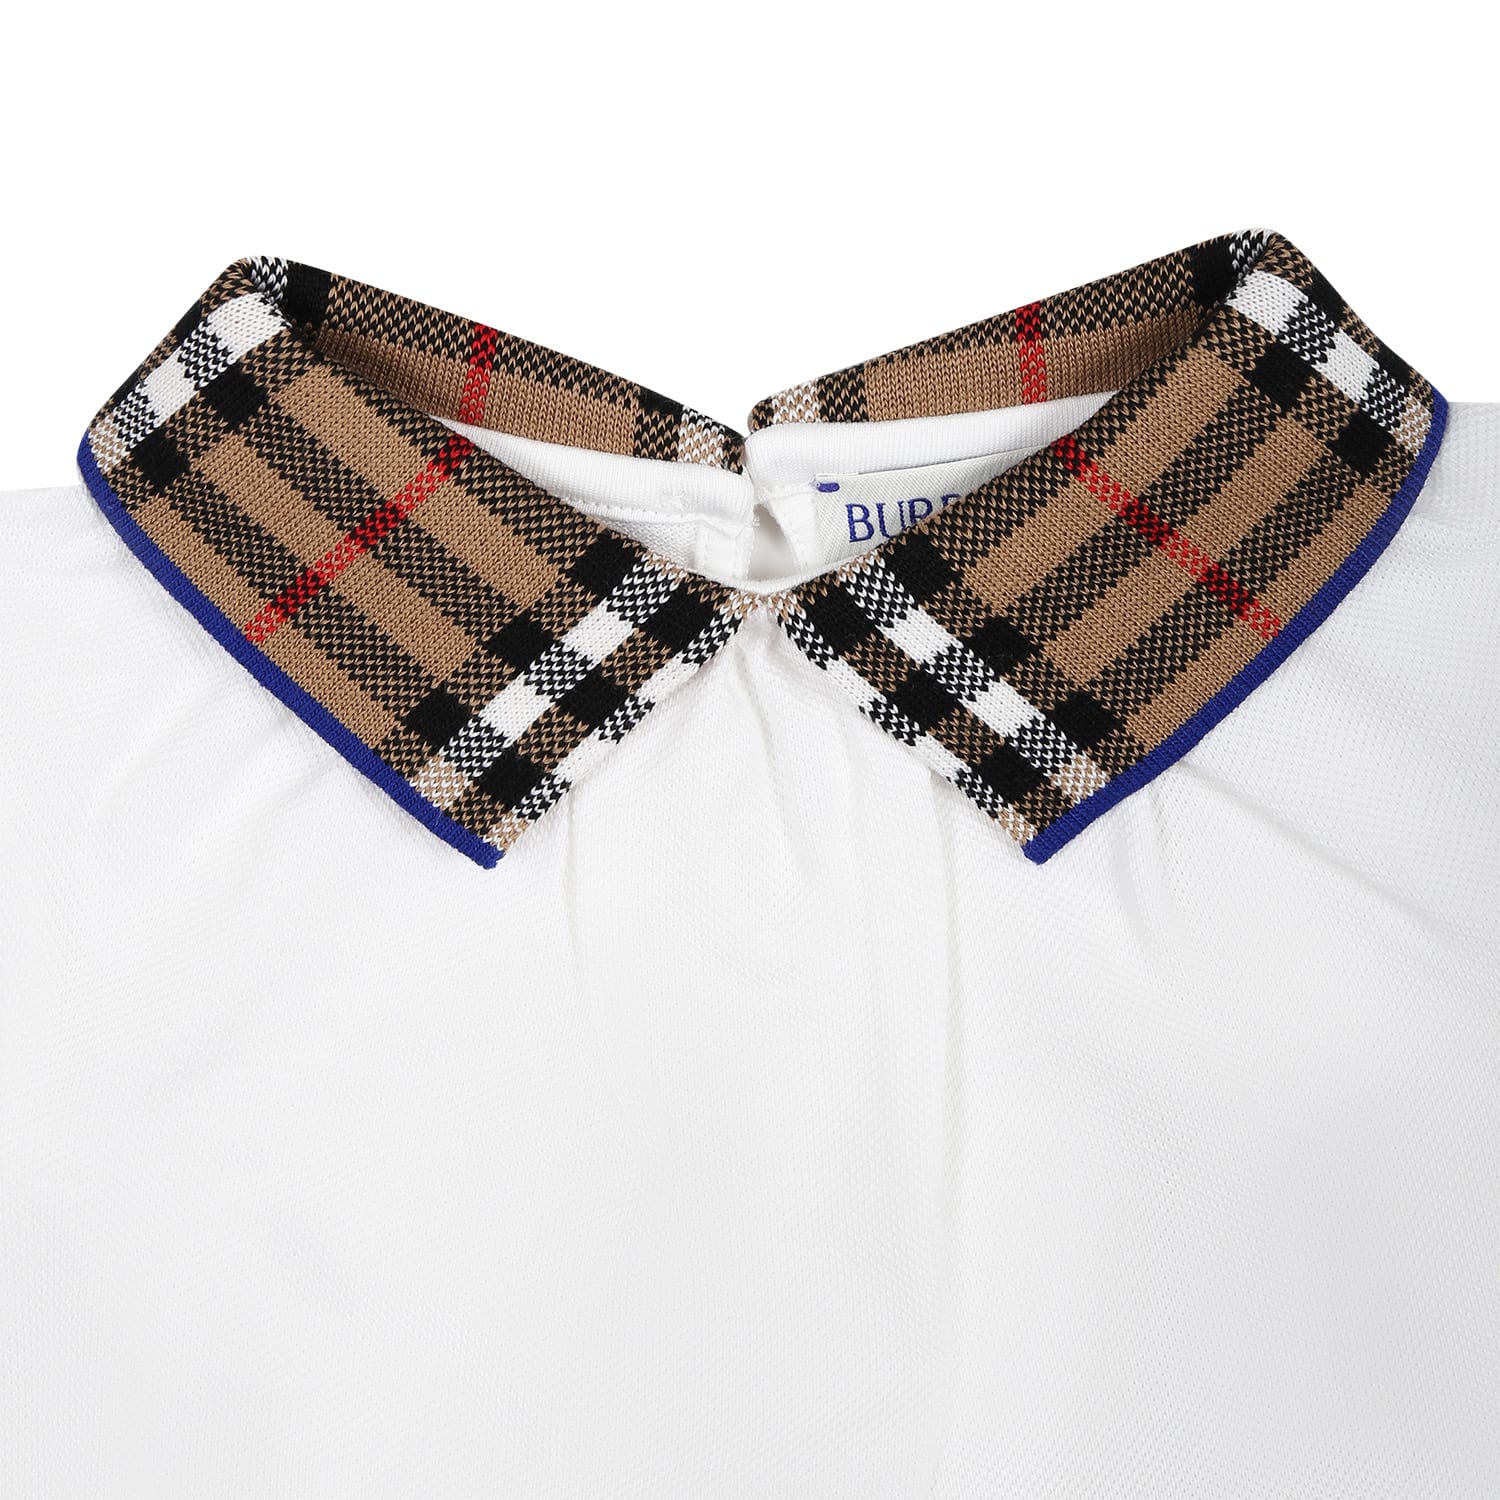 Shop Burberry White T-shirt For Baby Girl With Vintage Check On The Collar